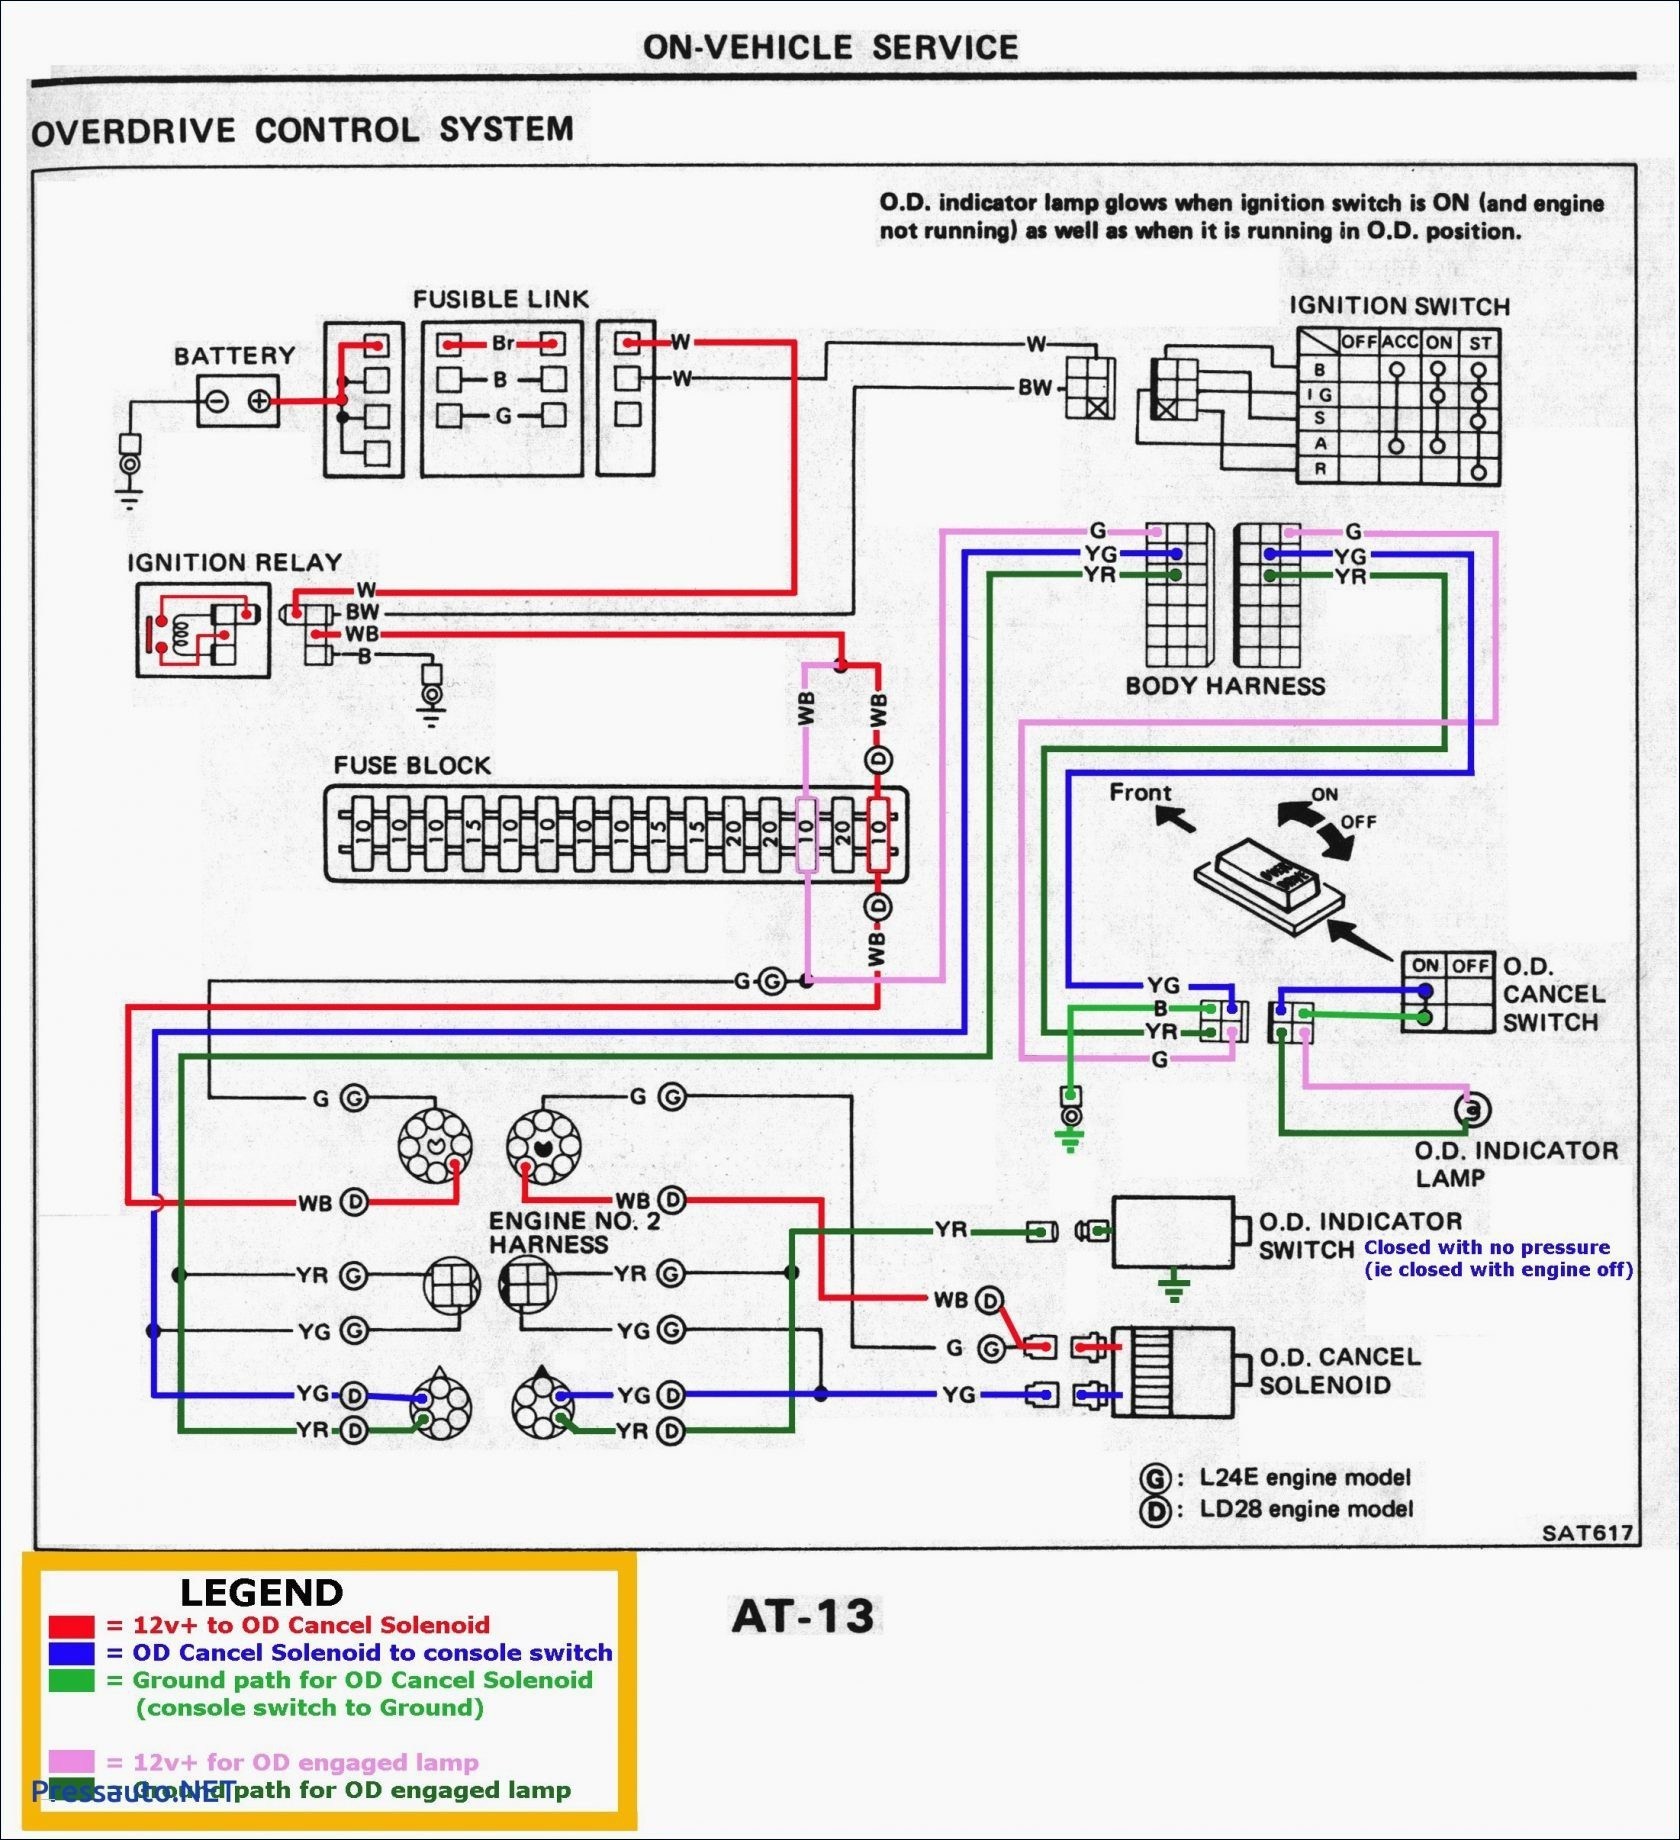 Shore Power Wiring Diagram Simple Awesome Wiring Diagram For Reverse Lights